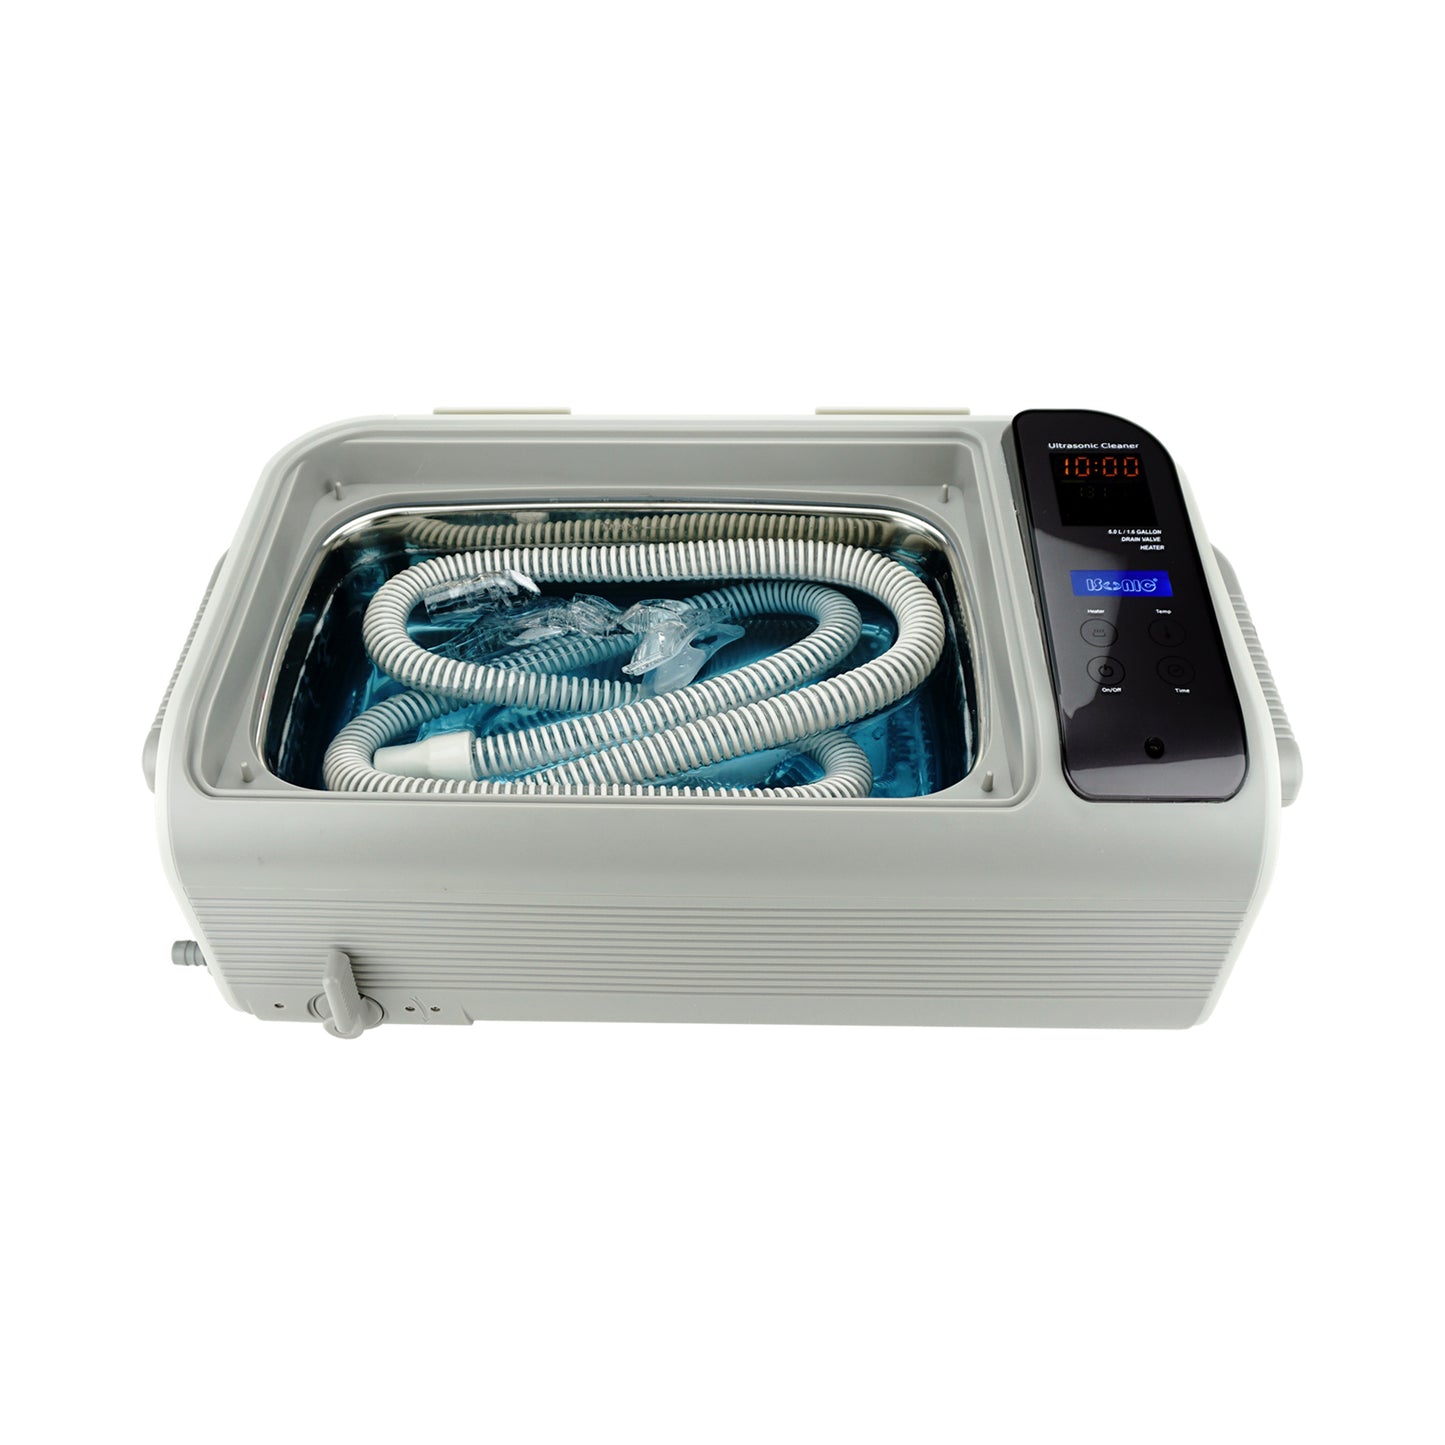 P4861-CPAP (large) | iSonic® Ultrasonic CPAP/BiPAP Cleaner, 1.6Gal/6L, with a stainless steel weight bracket, a box of cleaning tablet